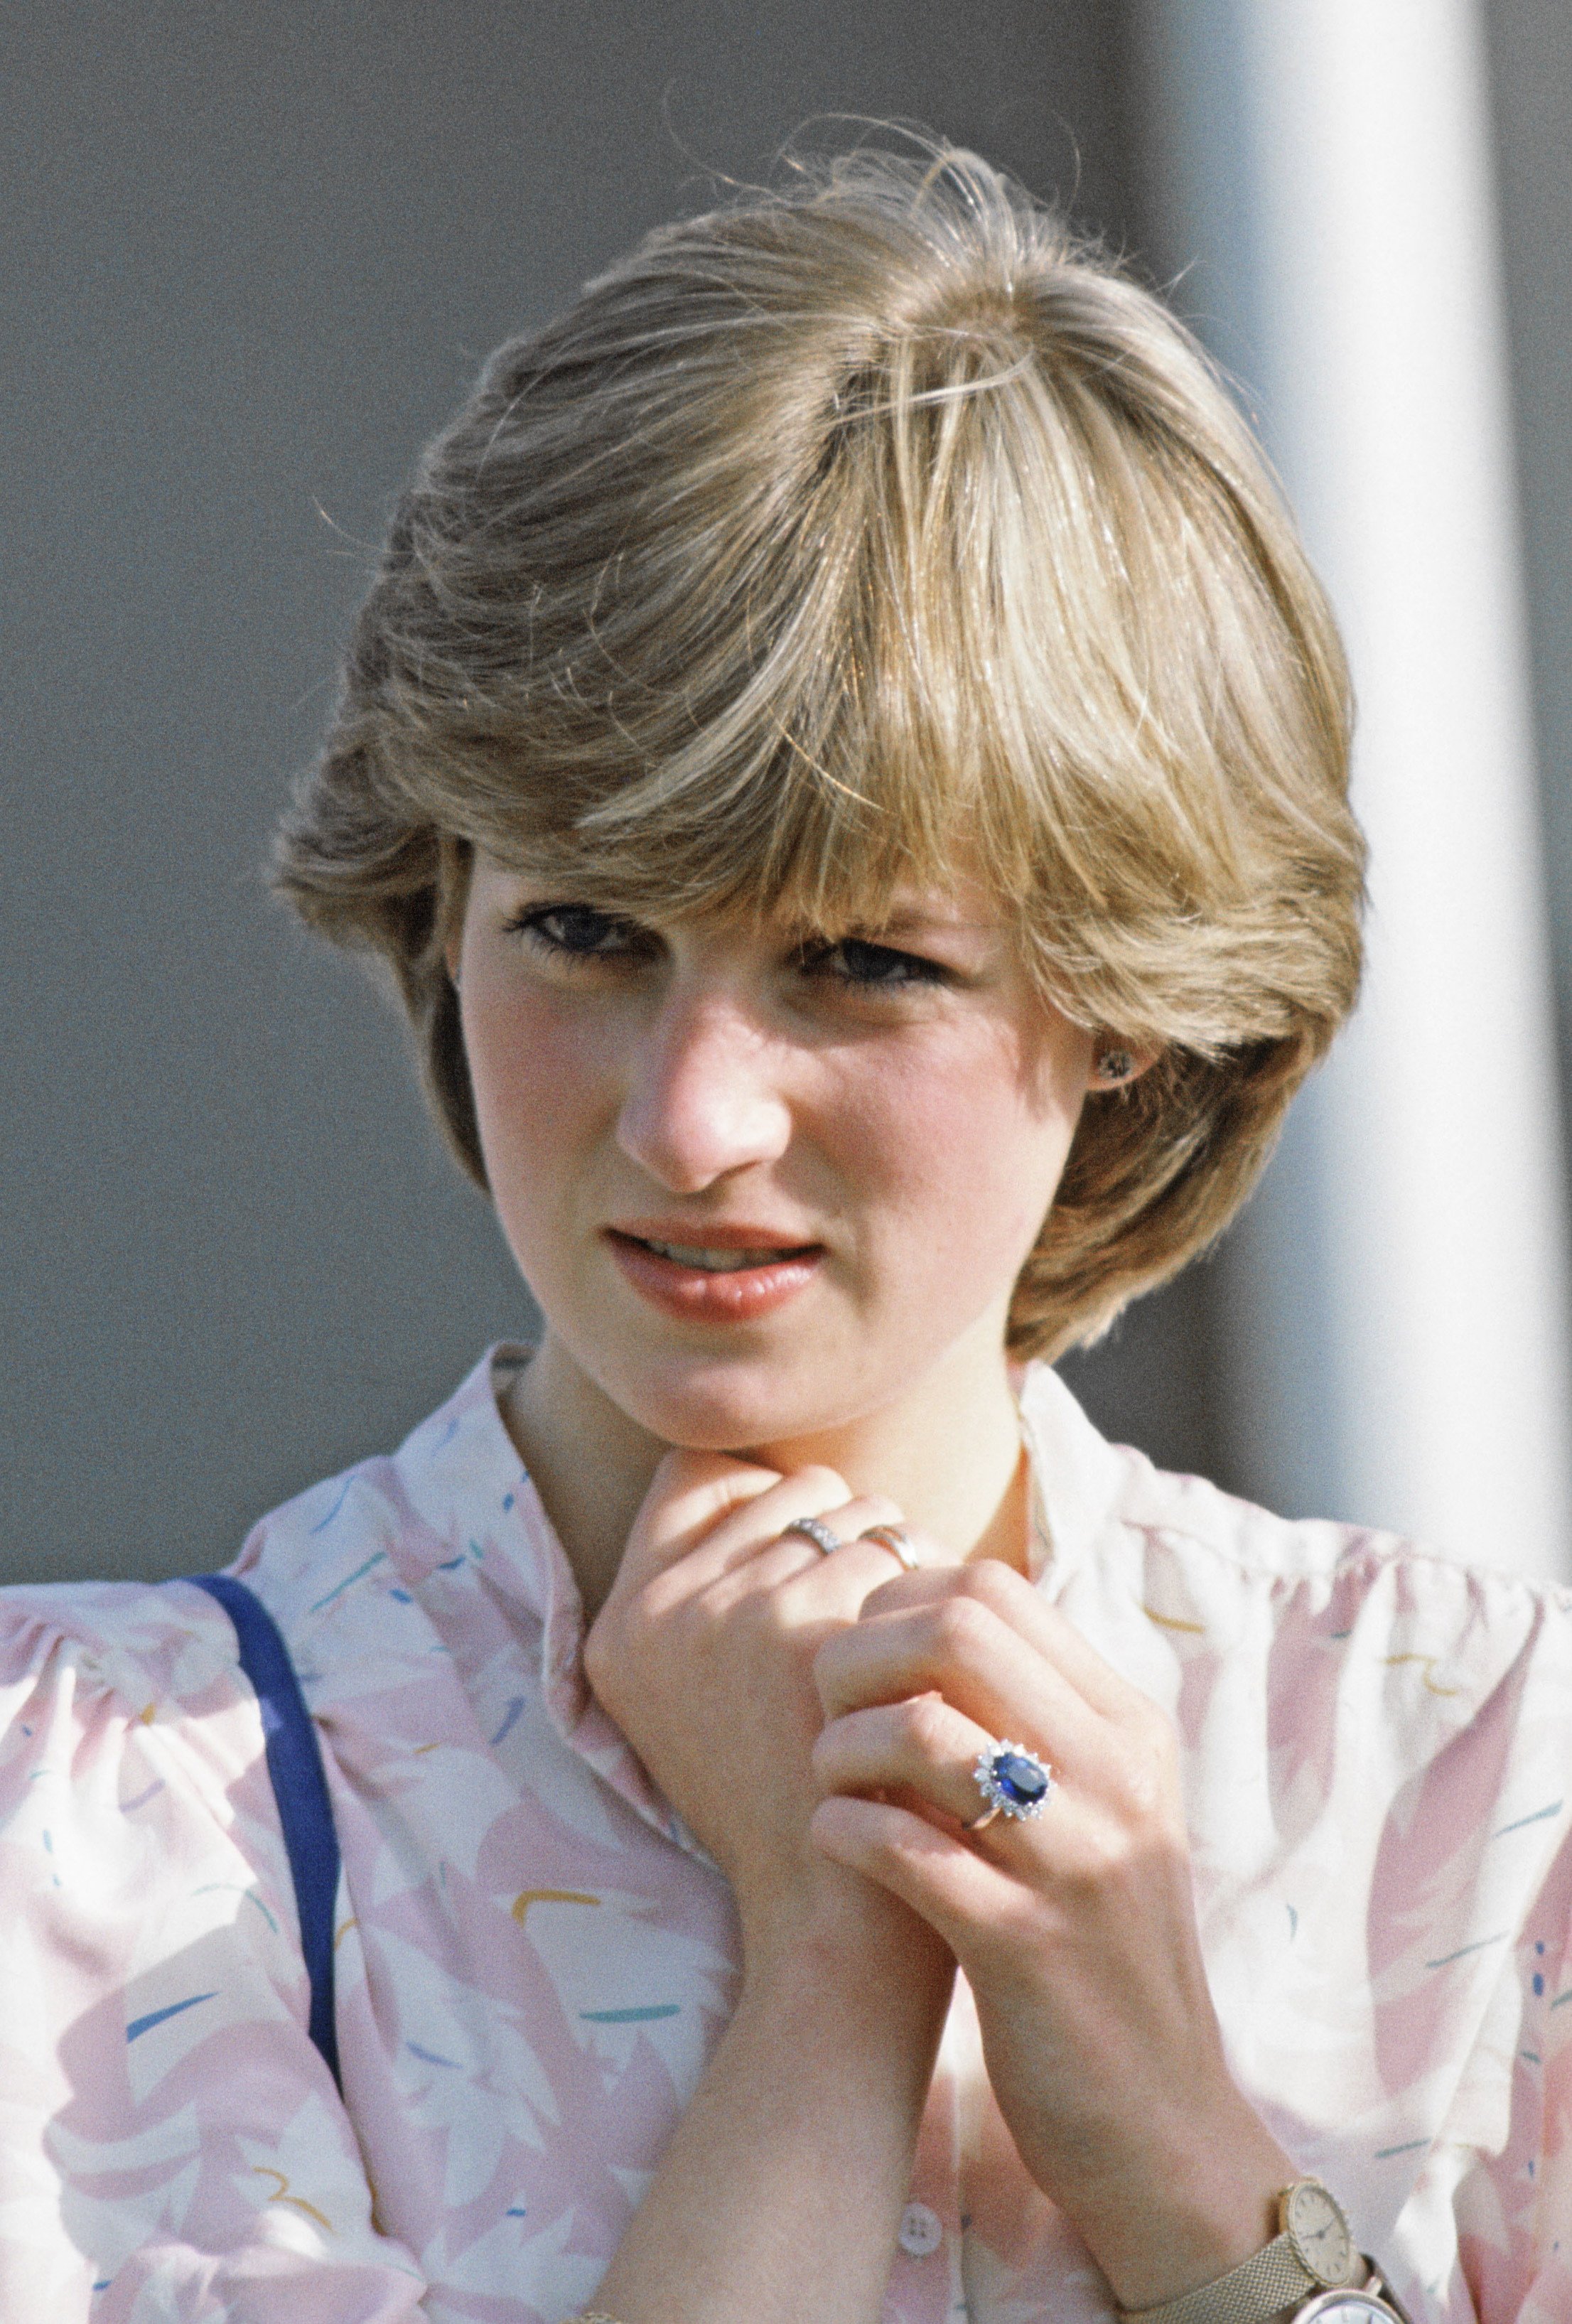 Lady Diana Spencer, Before Becoming Princess Diana, At Guards Polo Club In Windsor. She Is Wearing A New Watch (as Well As Her Old Watch) And Gold Bracelet, Which Were Birthday Gifts From Prince Charles. | Source: Getty Images